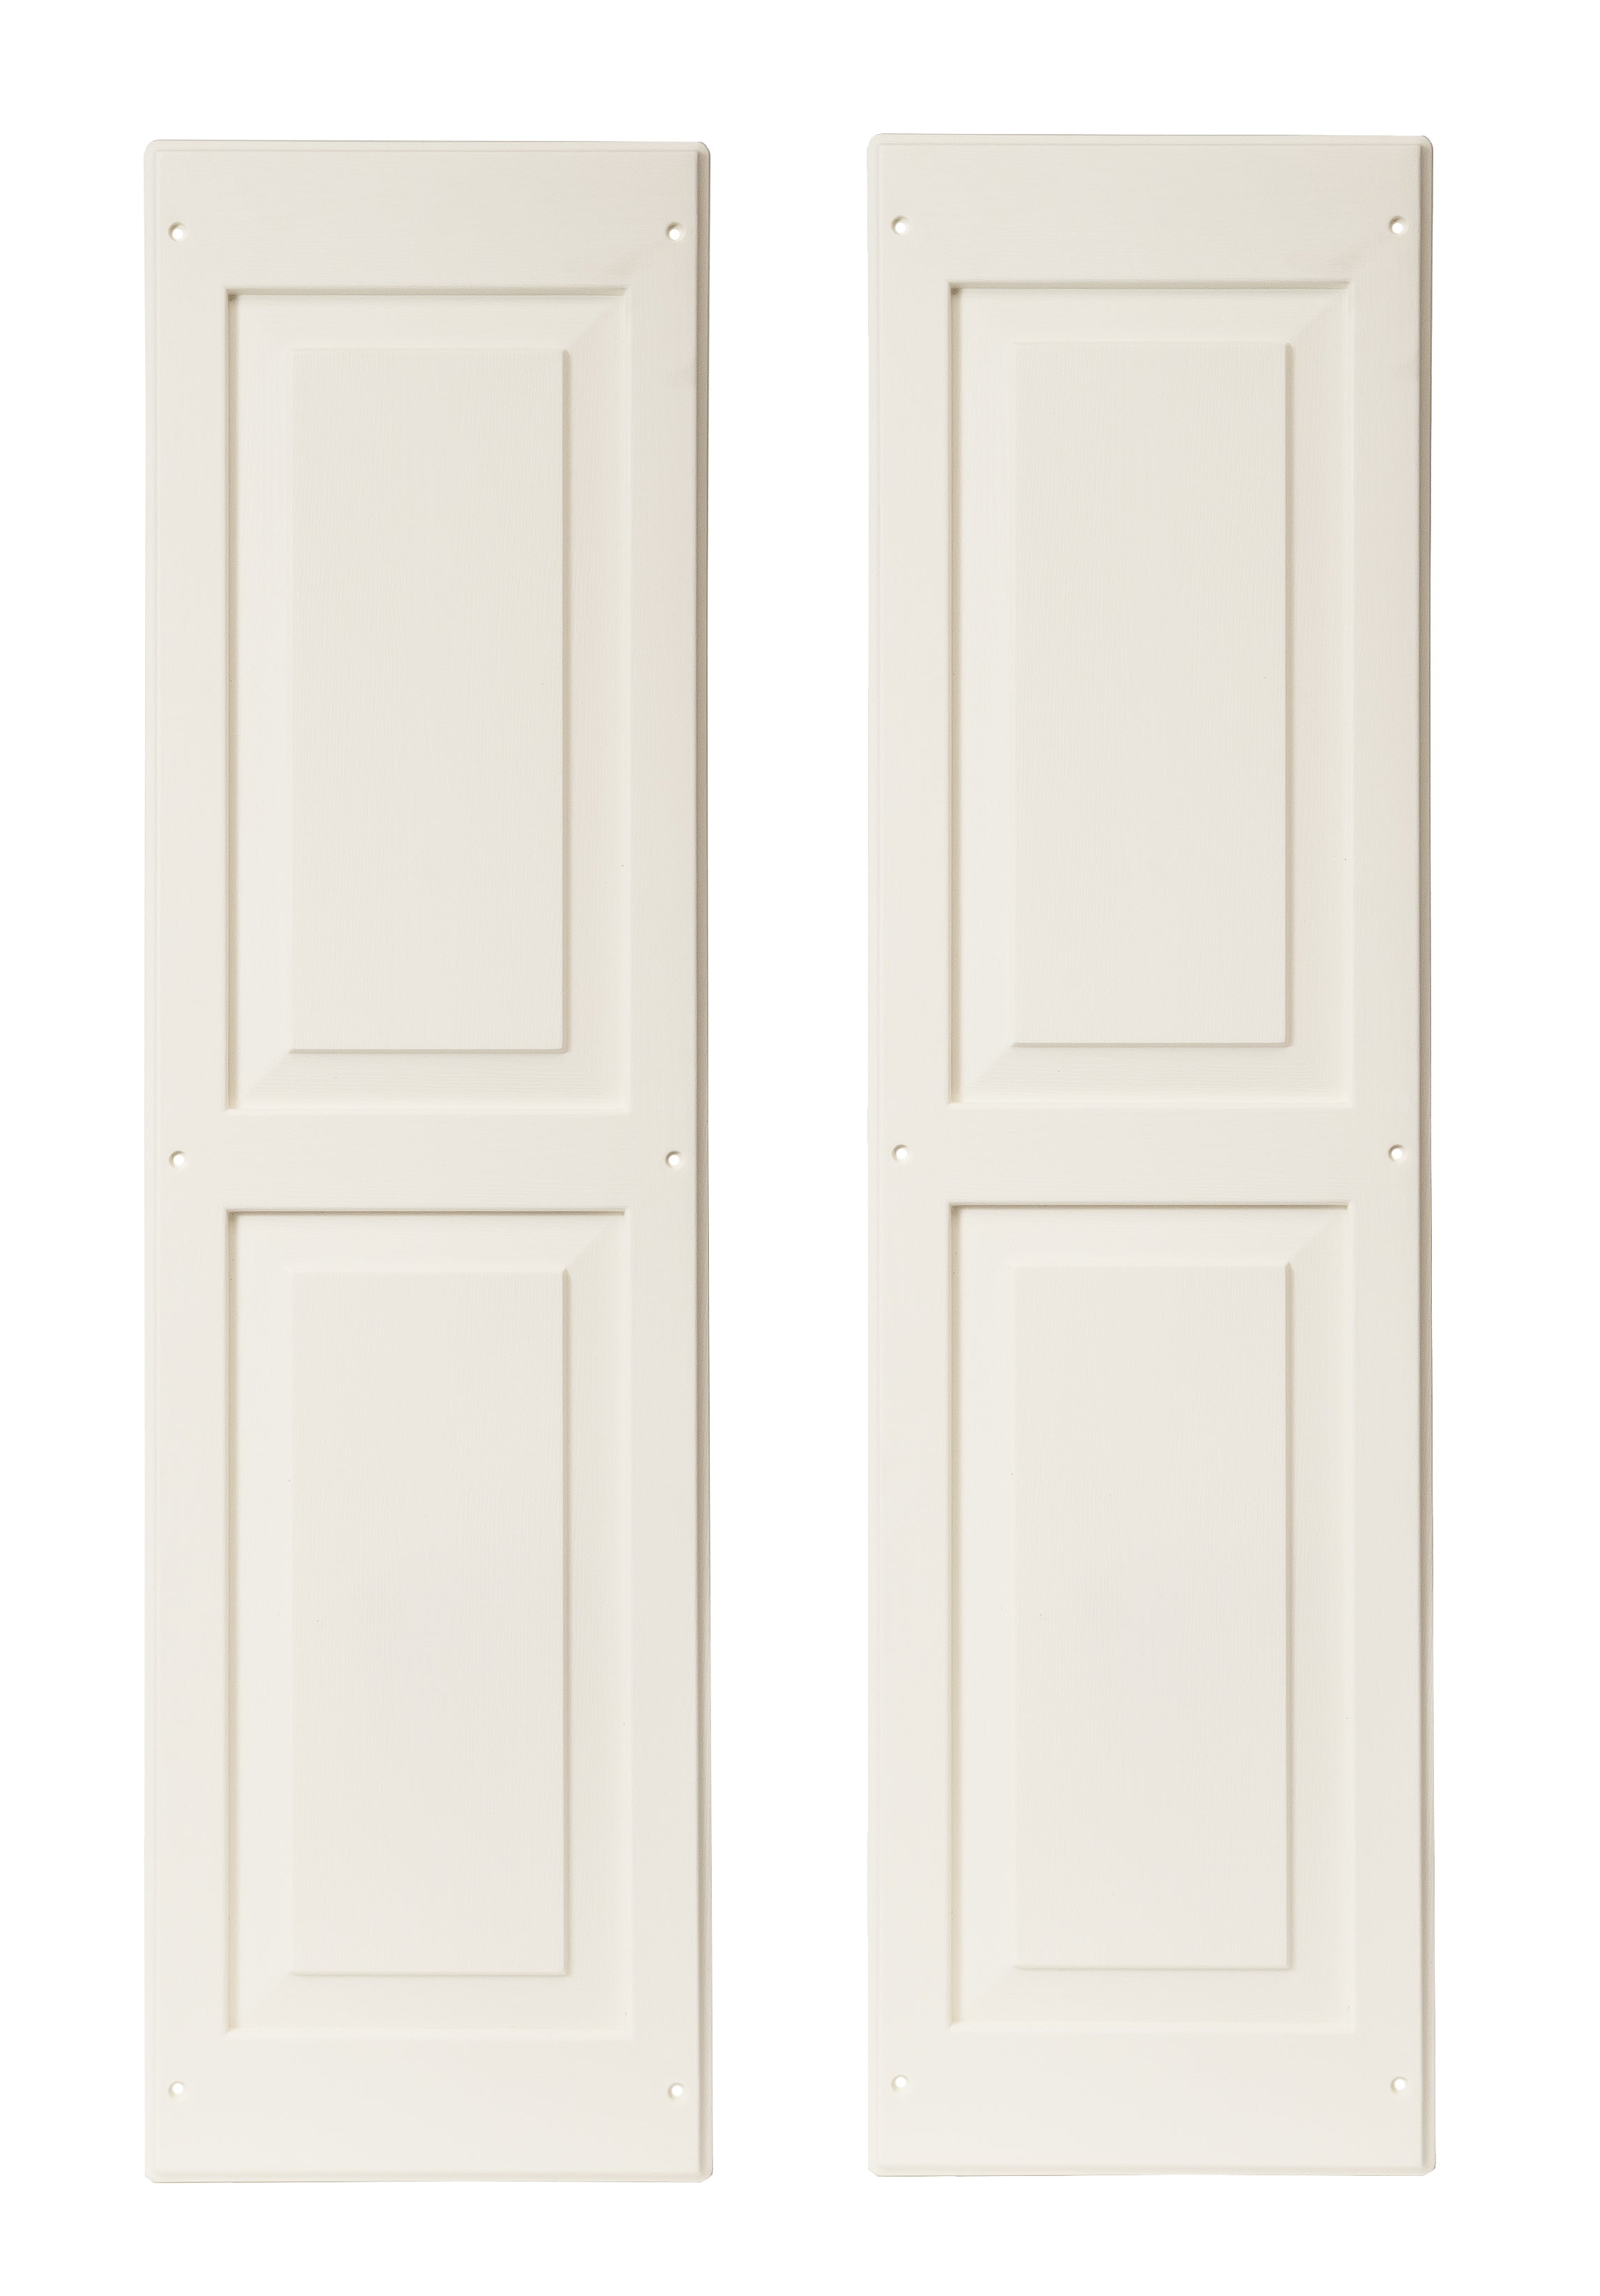 Pair of 12" W x 43" H Raised Panel White Shutters for Sheds, Playhouses, and MORE 